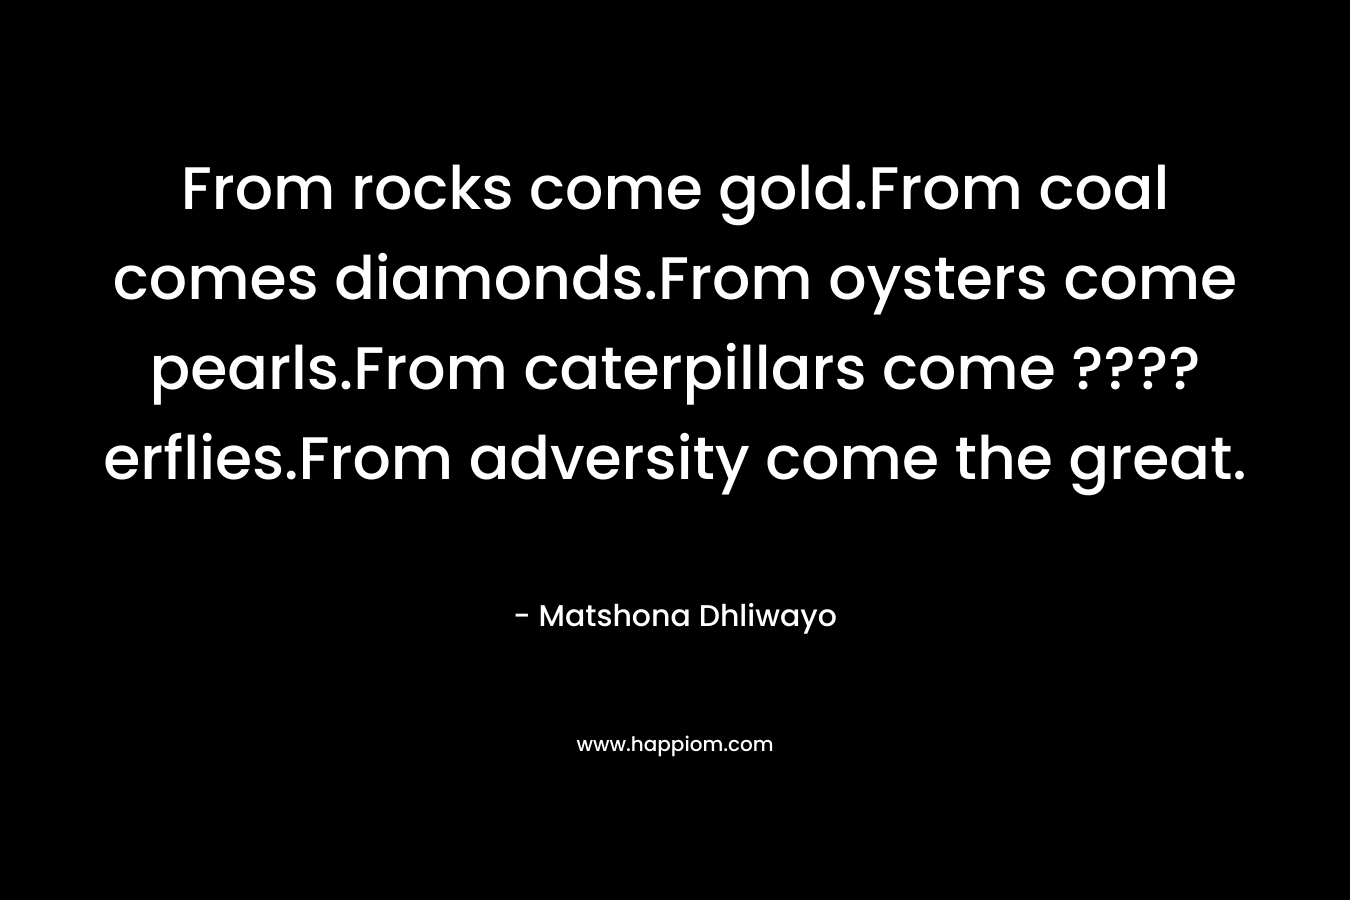 From rocks come gold.From coal comes diamonds.From oysters come pearls.From caterpillars come ????erflies.From adversity come the great.